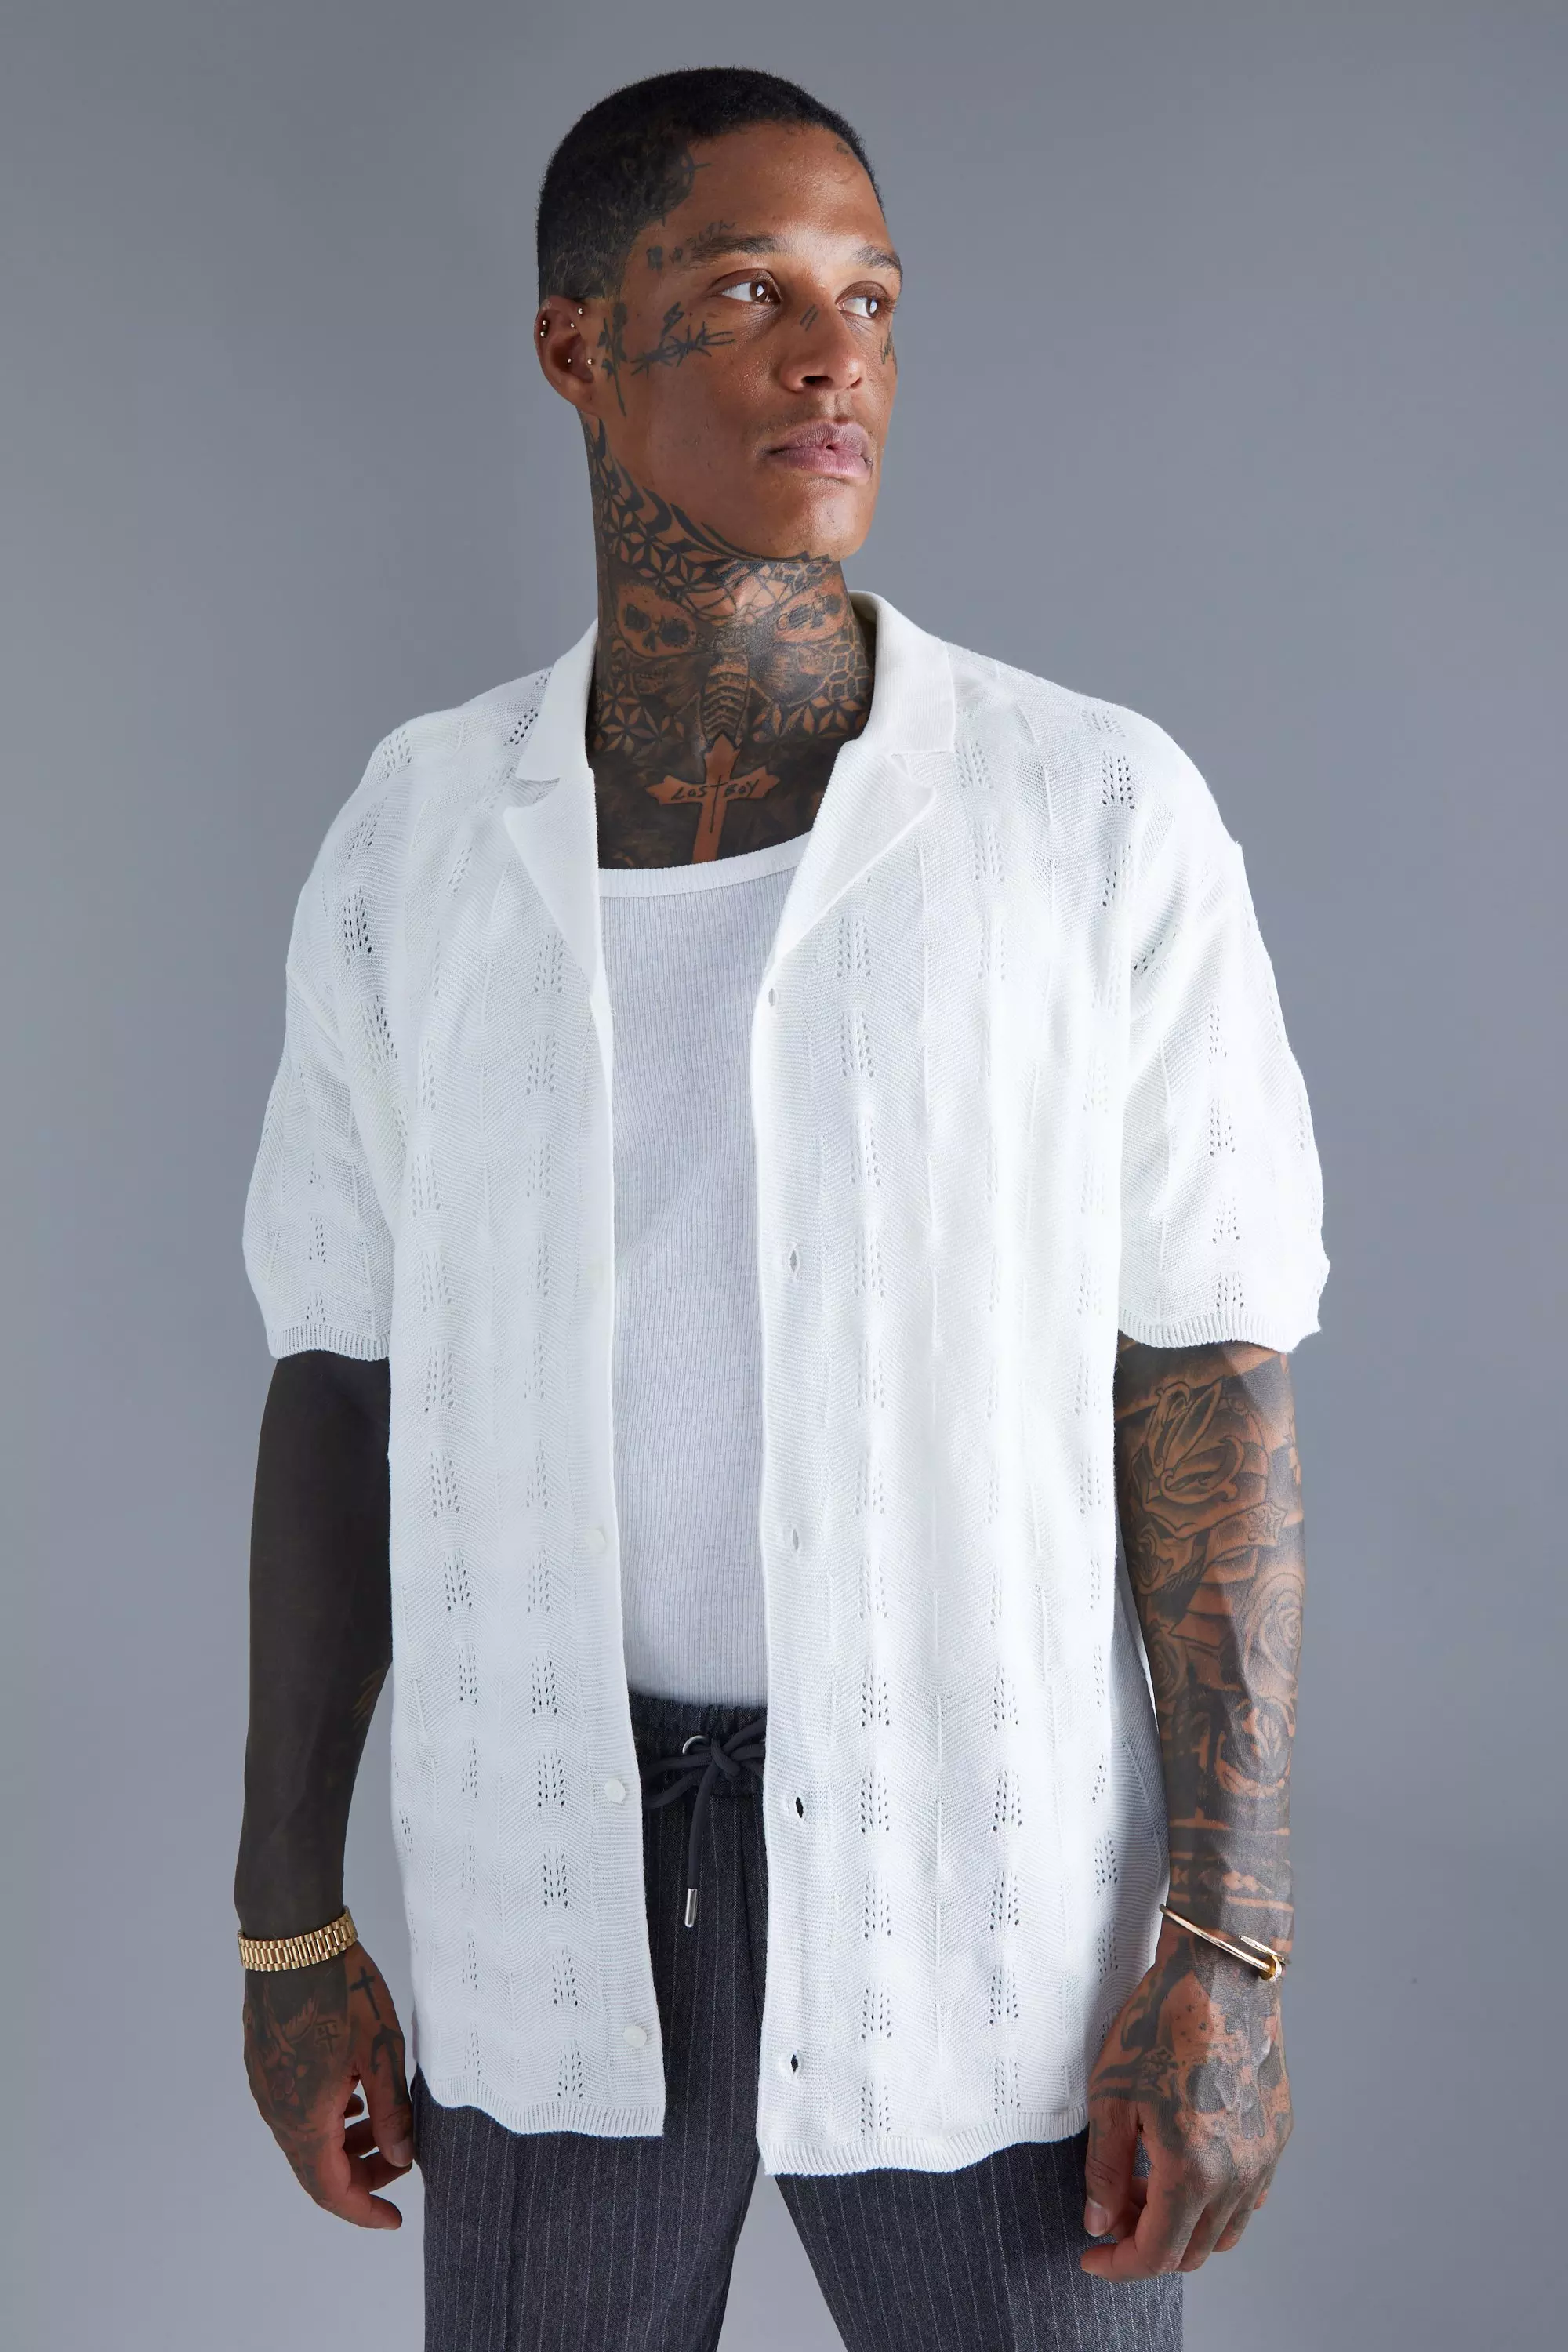 boohoo Mens Open Stitch Button Down Knitted Shirt - White XL